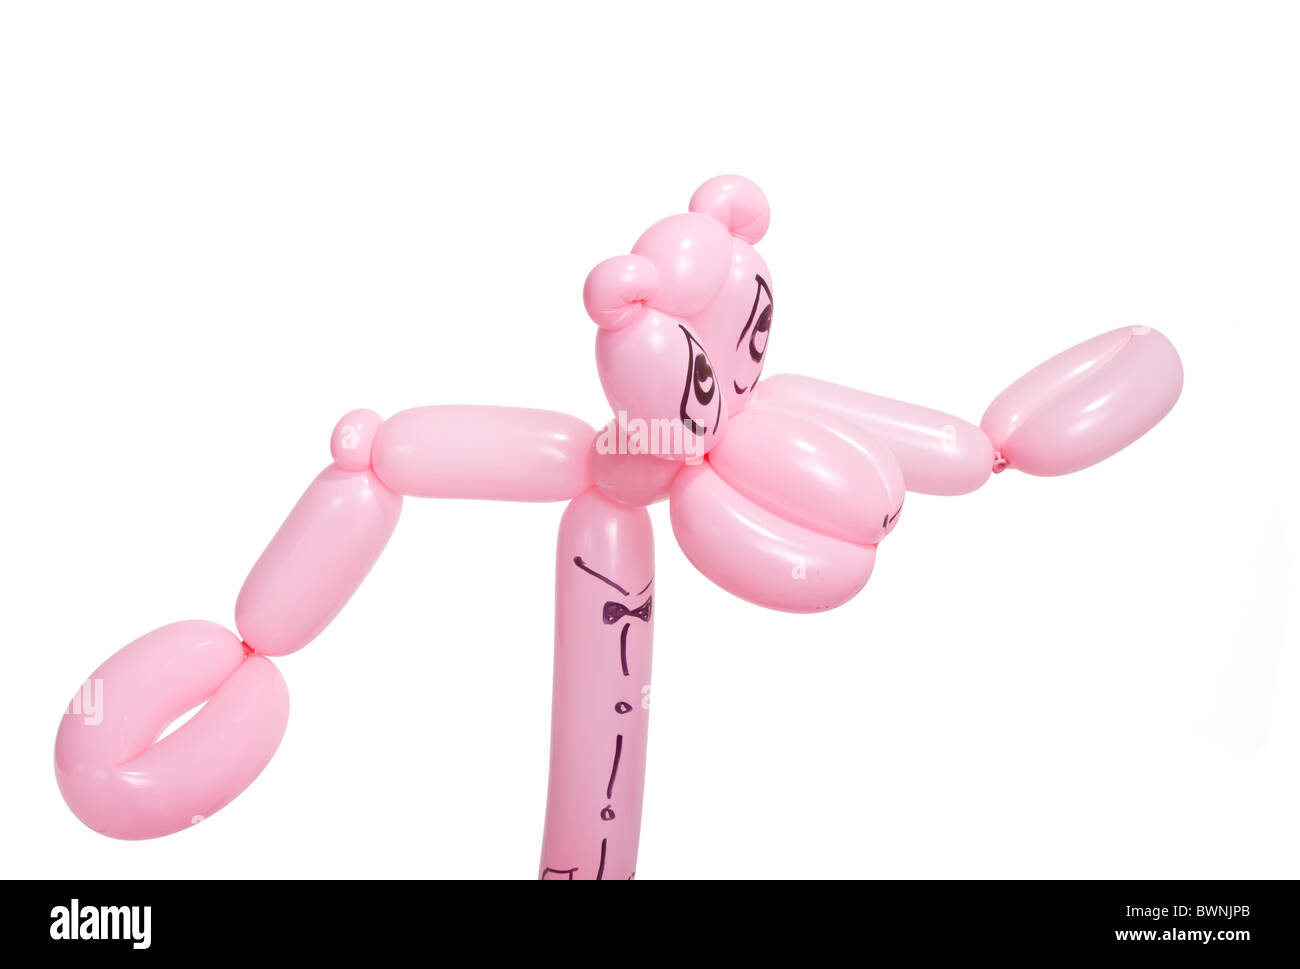 Pink panther sculpture made from twisted balloons isolated on white background. Stock Photo